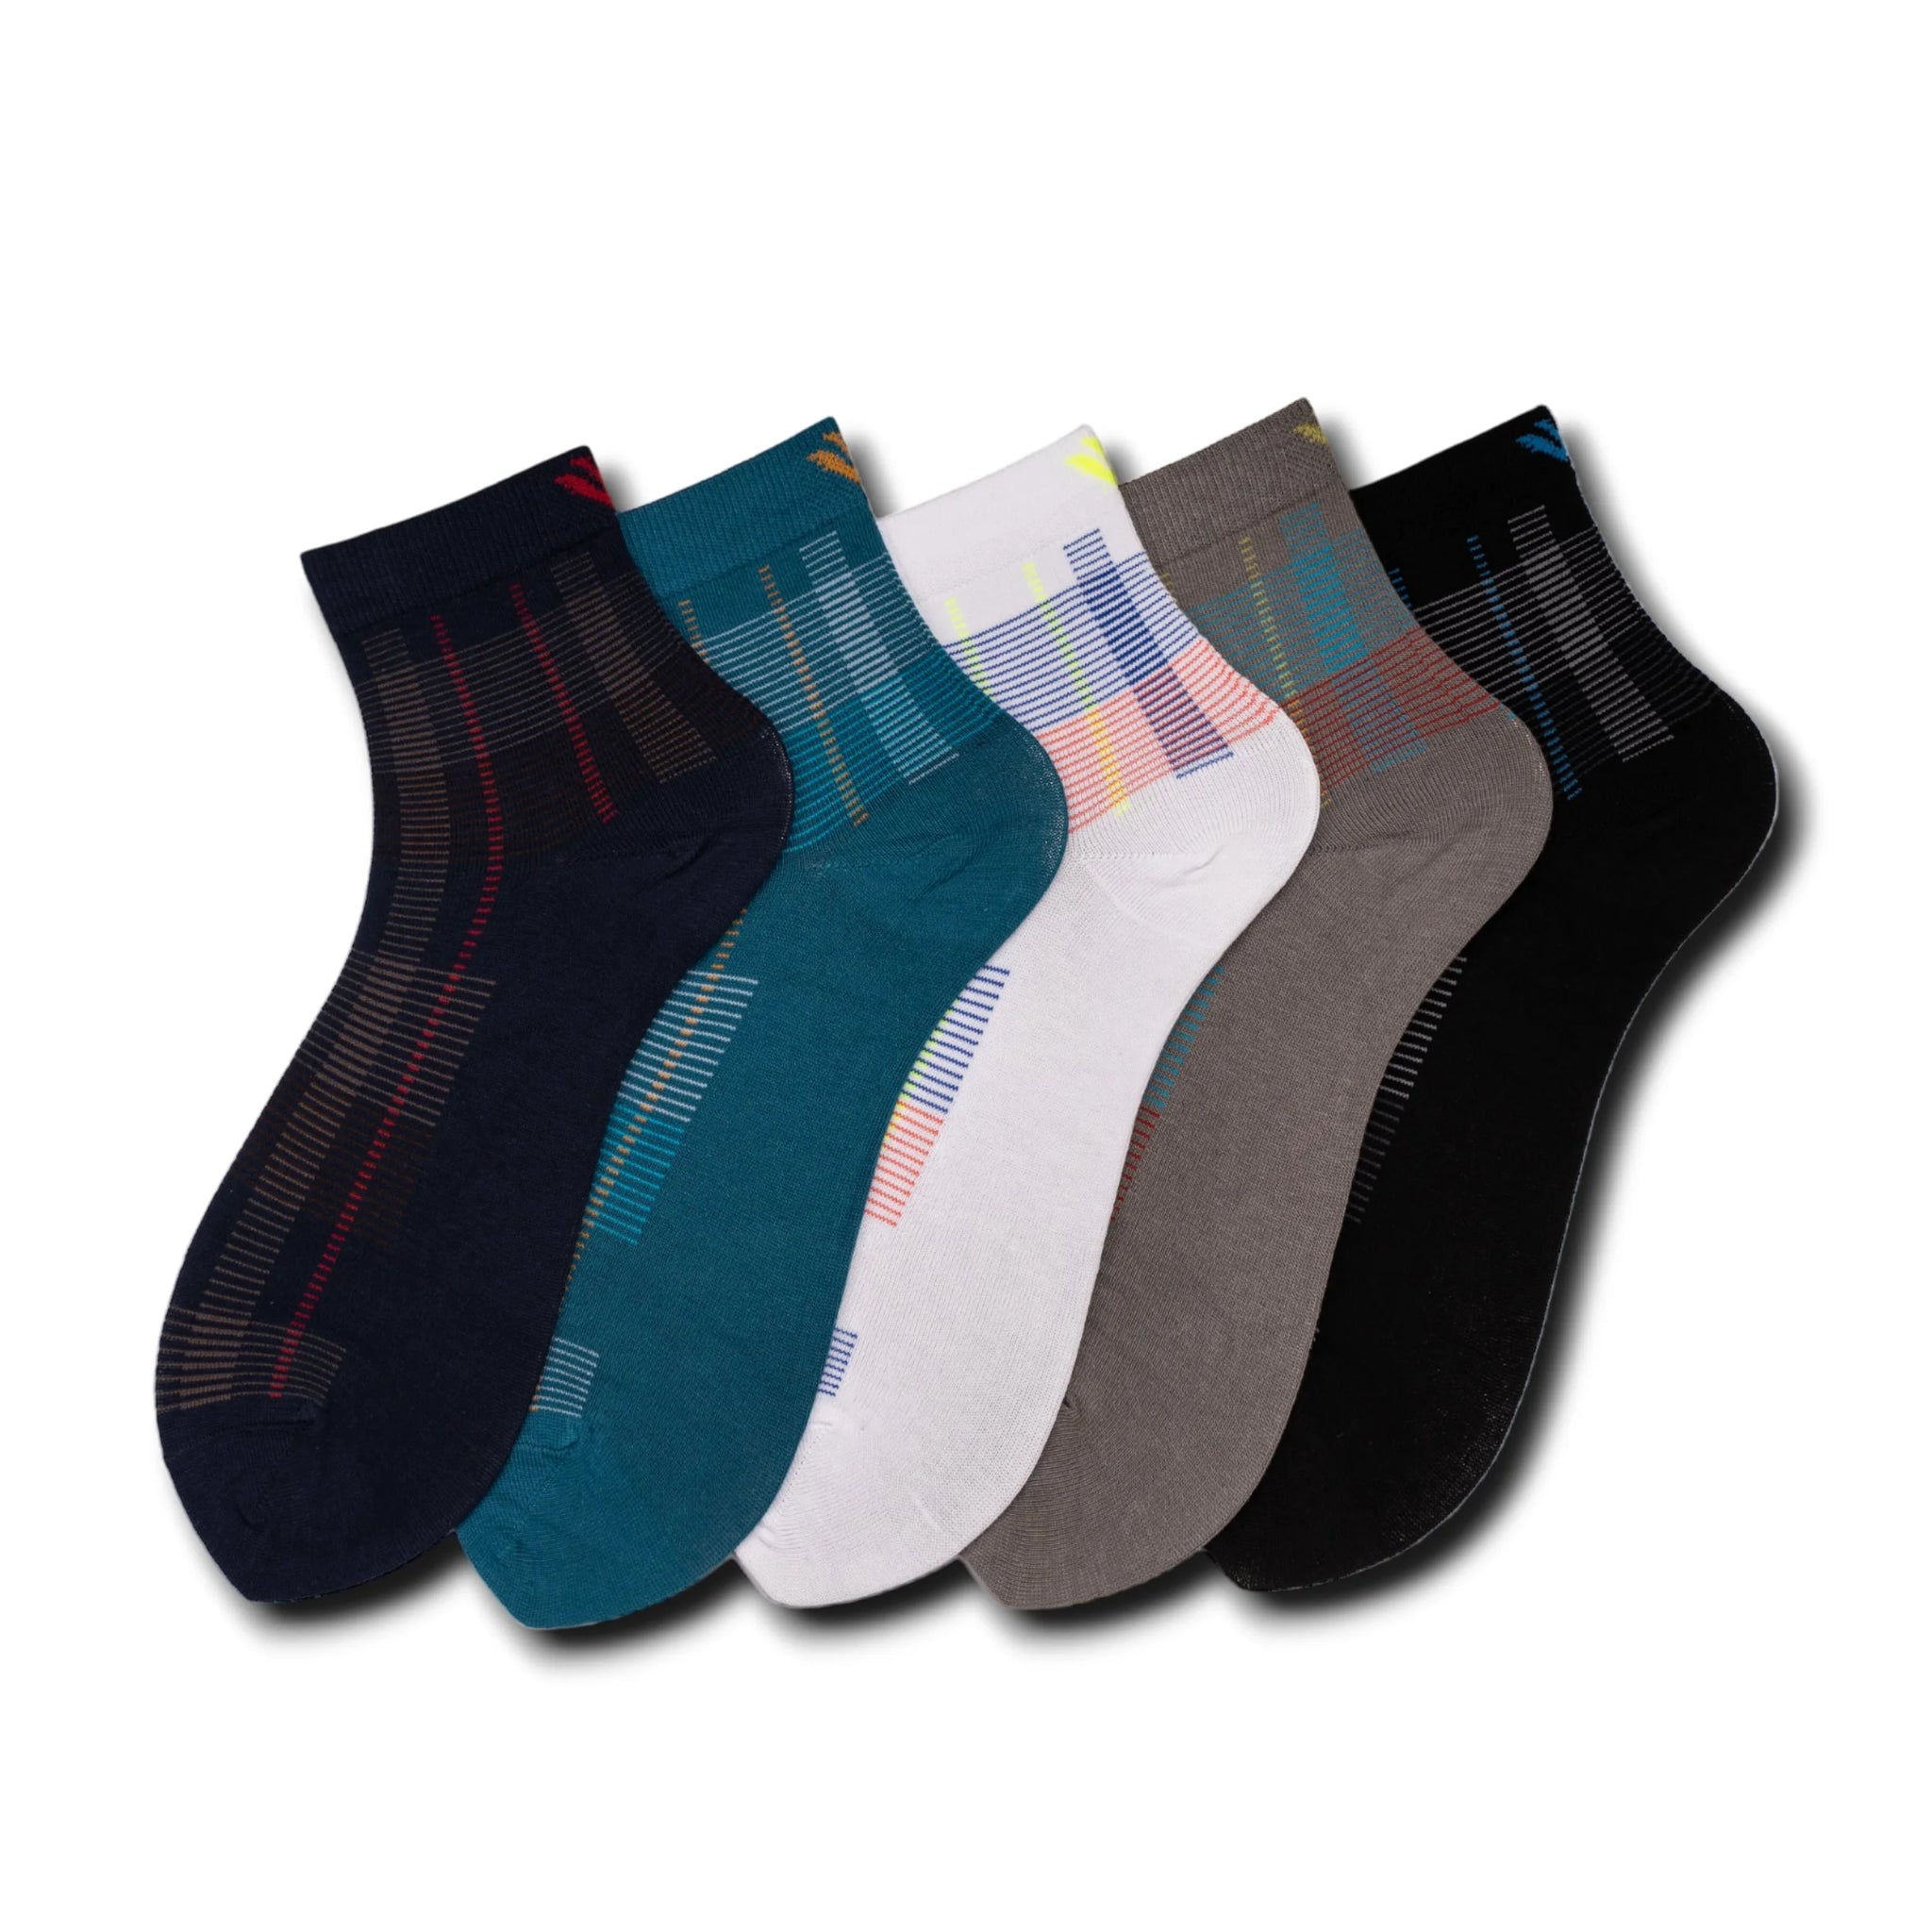 Young Wings Men's Multi Colour Cotton Fabric Design Ankle Length Socks - Pack of 5, Style no. M1-291 N